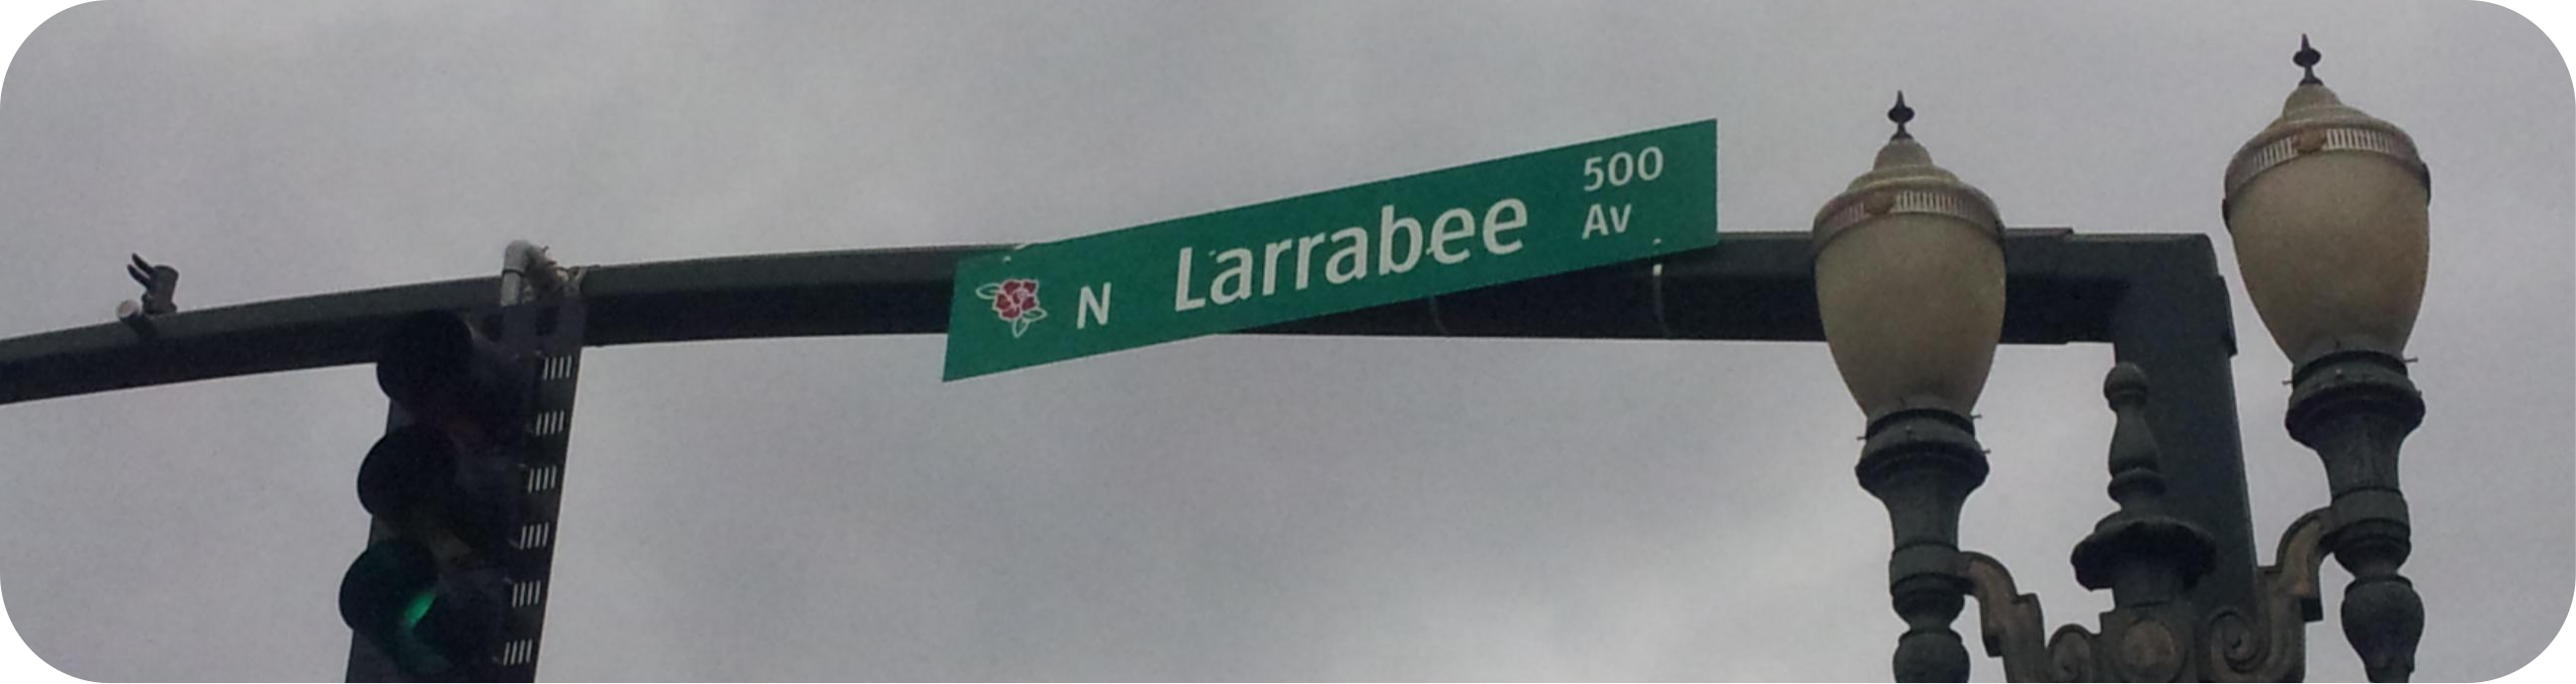 Larrabee Av in Portland (not what the project was named after)